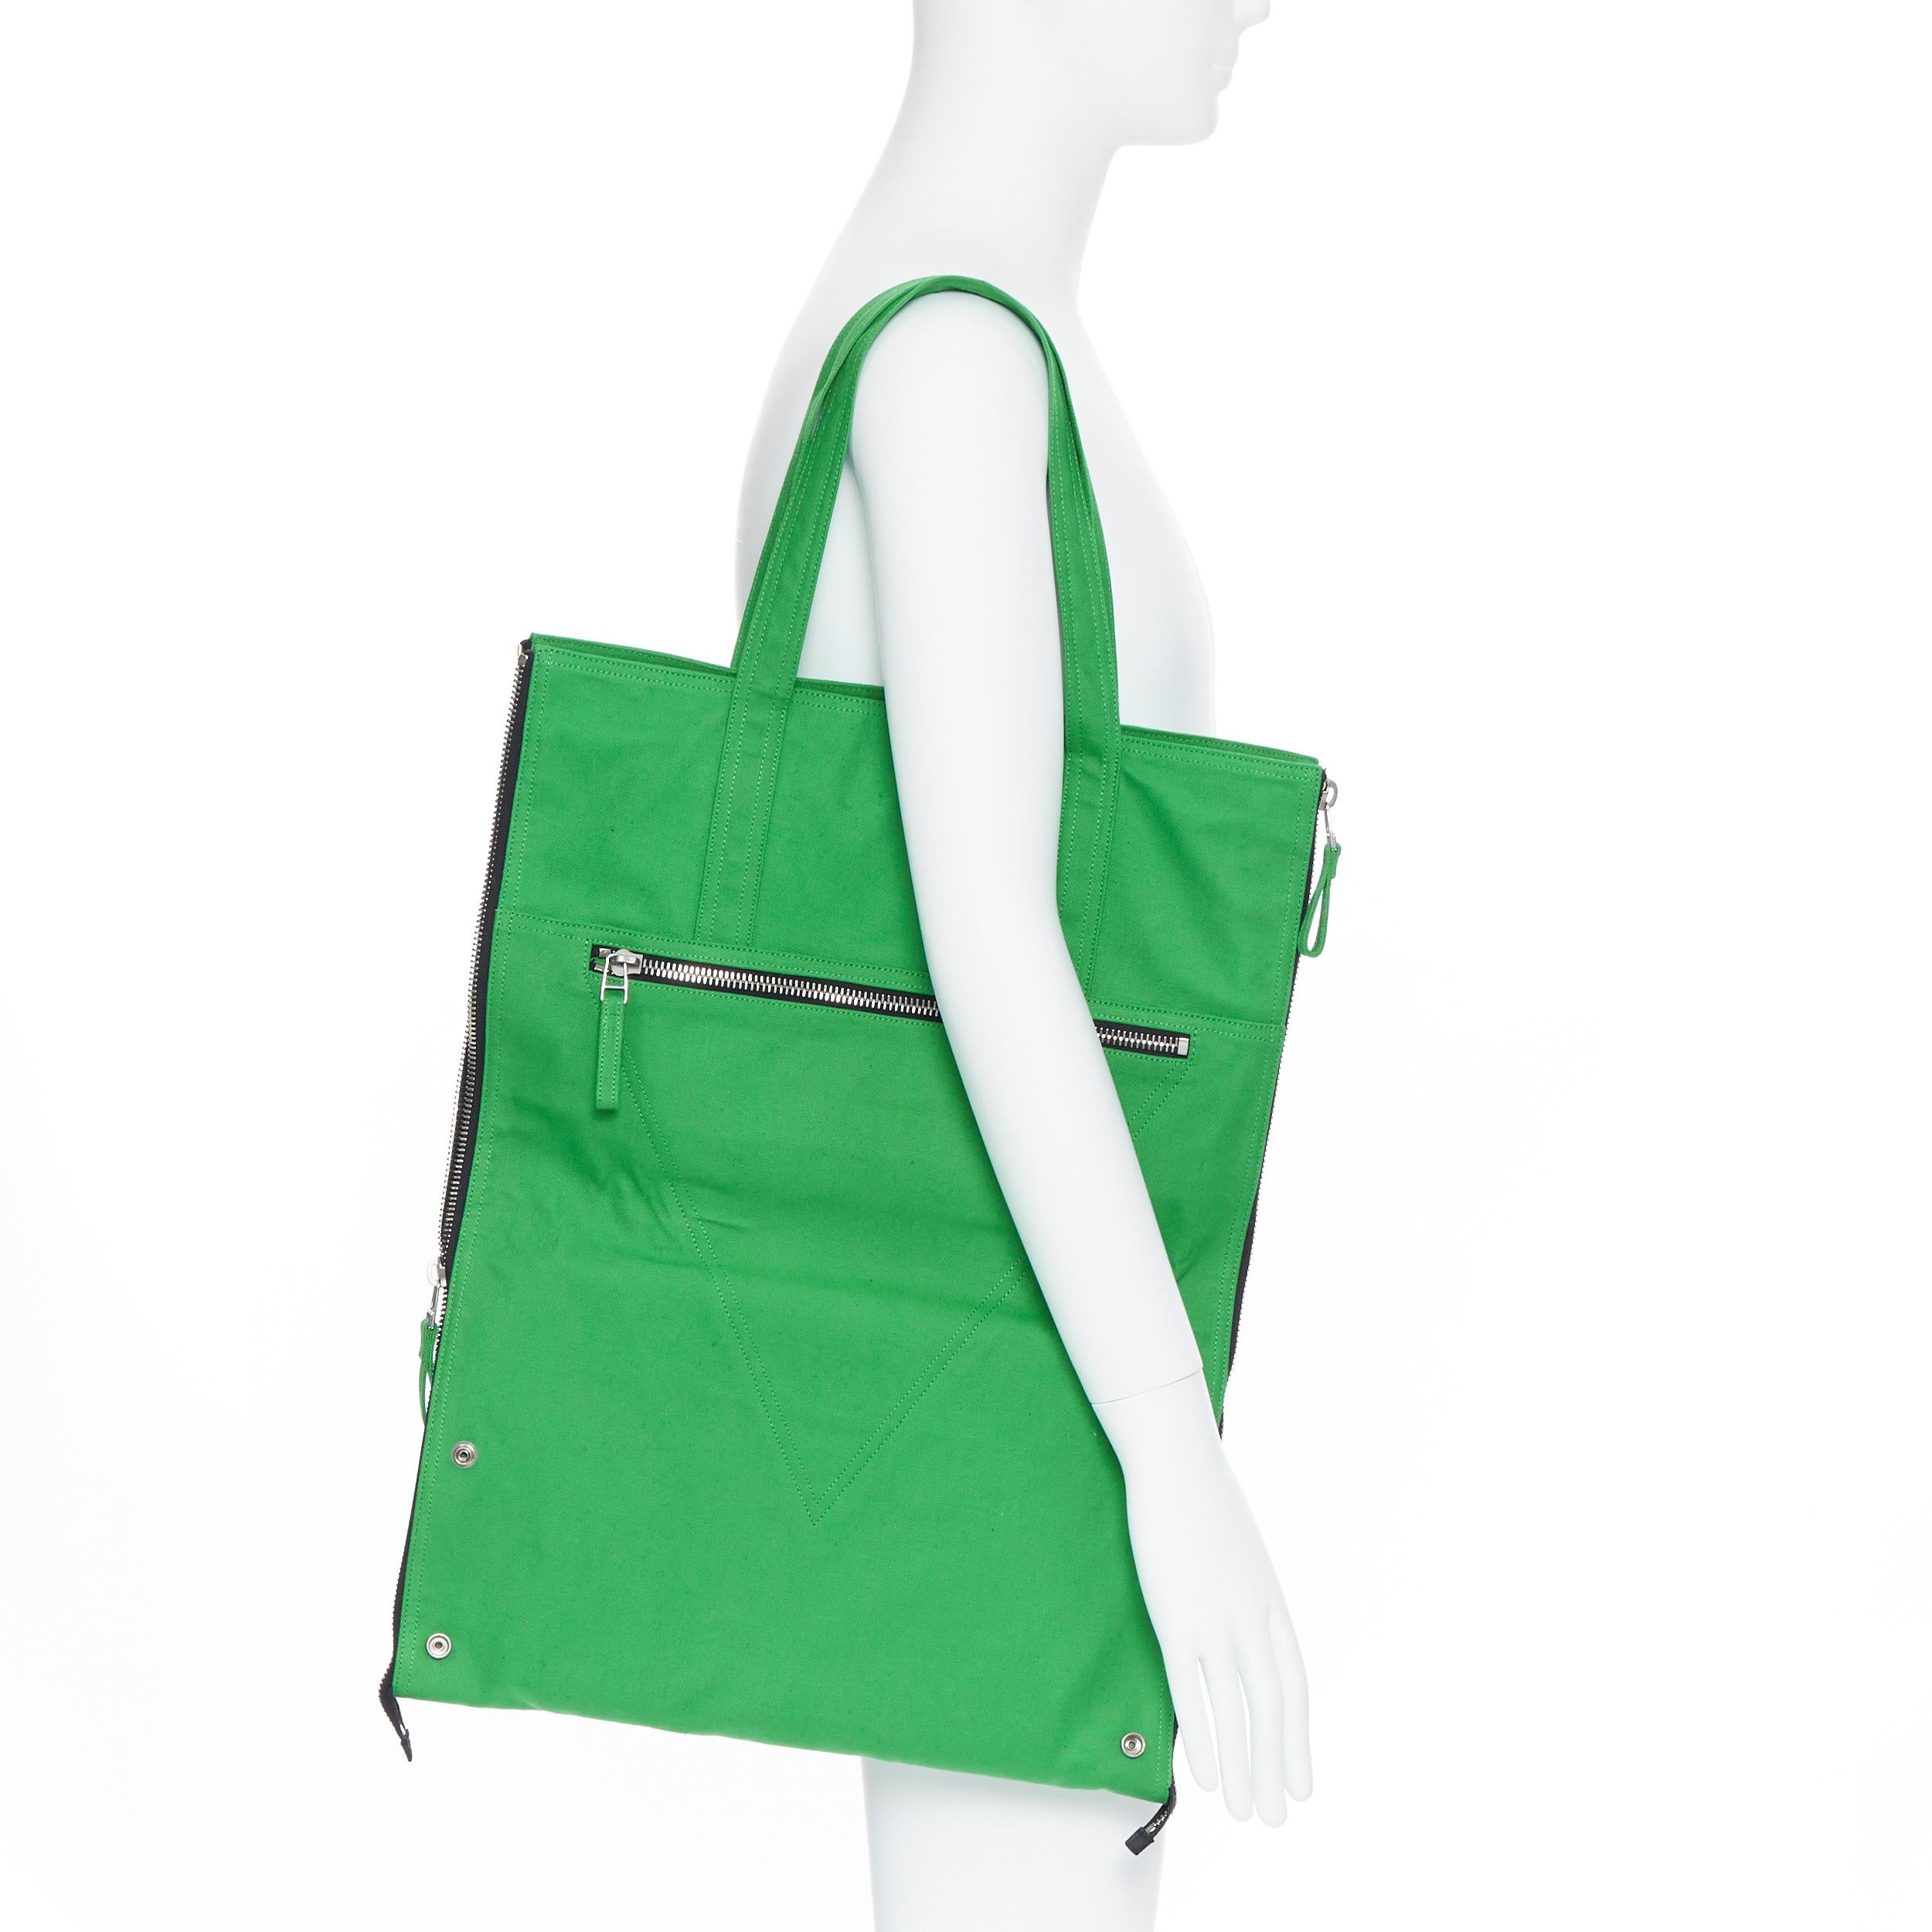 NEW BOTTEGA VENETA 2021 Runway Presentation extra large green canvas tote bag
Brand: Bottega Veneta
Collection: 2021
Model Name / Style: Tote bag
Material: Cotton
Color: Green
Pattern: Solid
Closure: Zip
Extra Detail: This is the tote bag that held